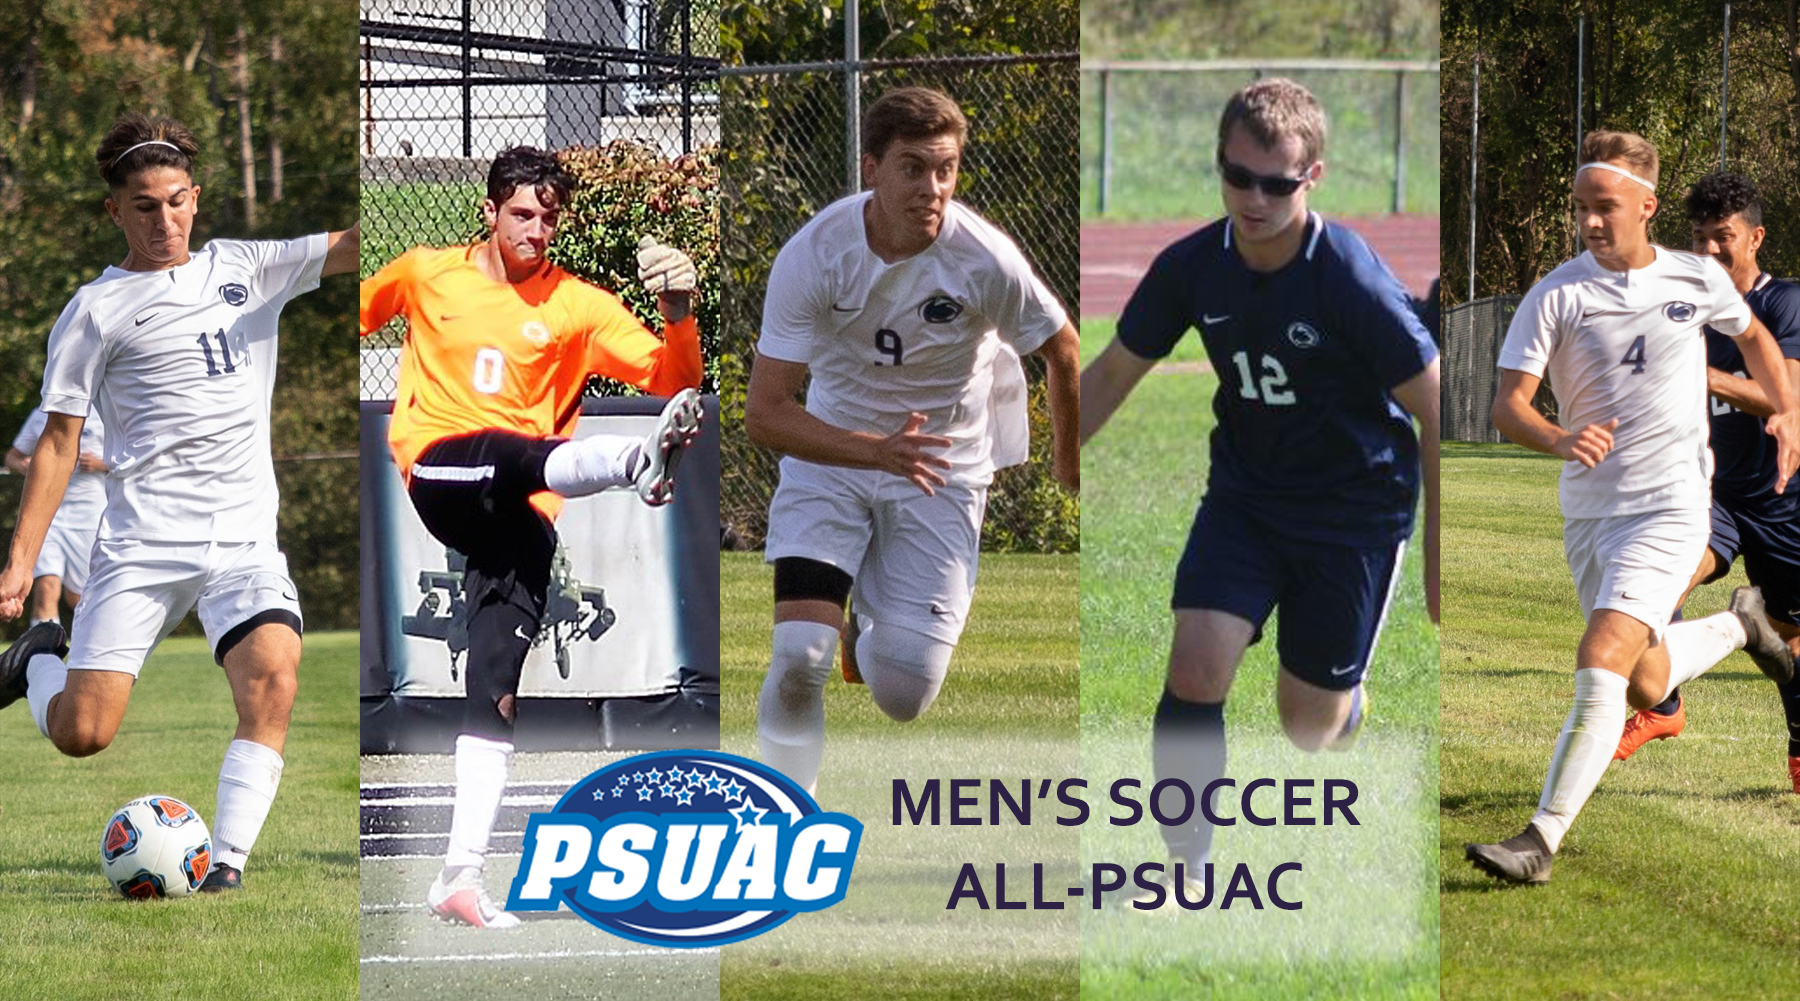 Five Lions Land All-PSUAC Honors in Men's Soccer